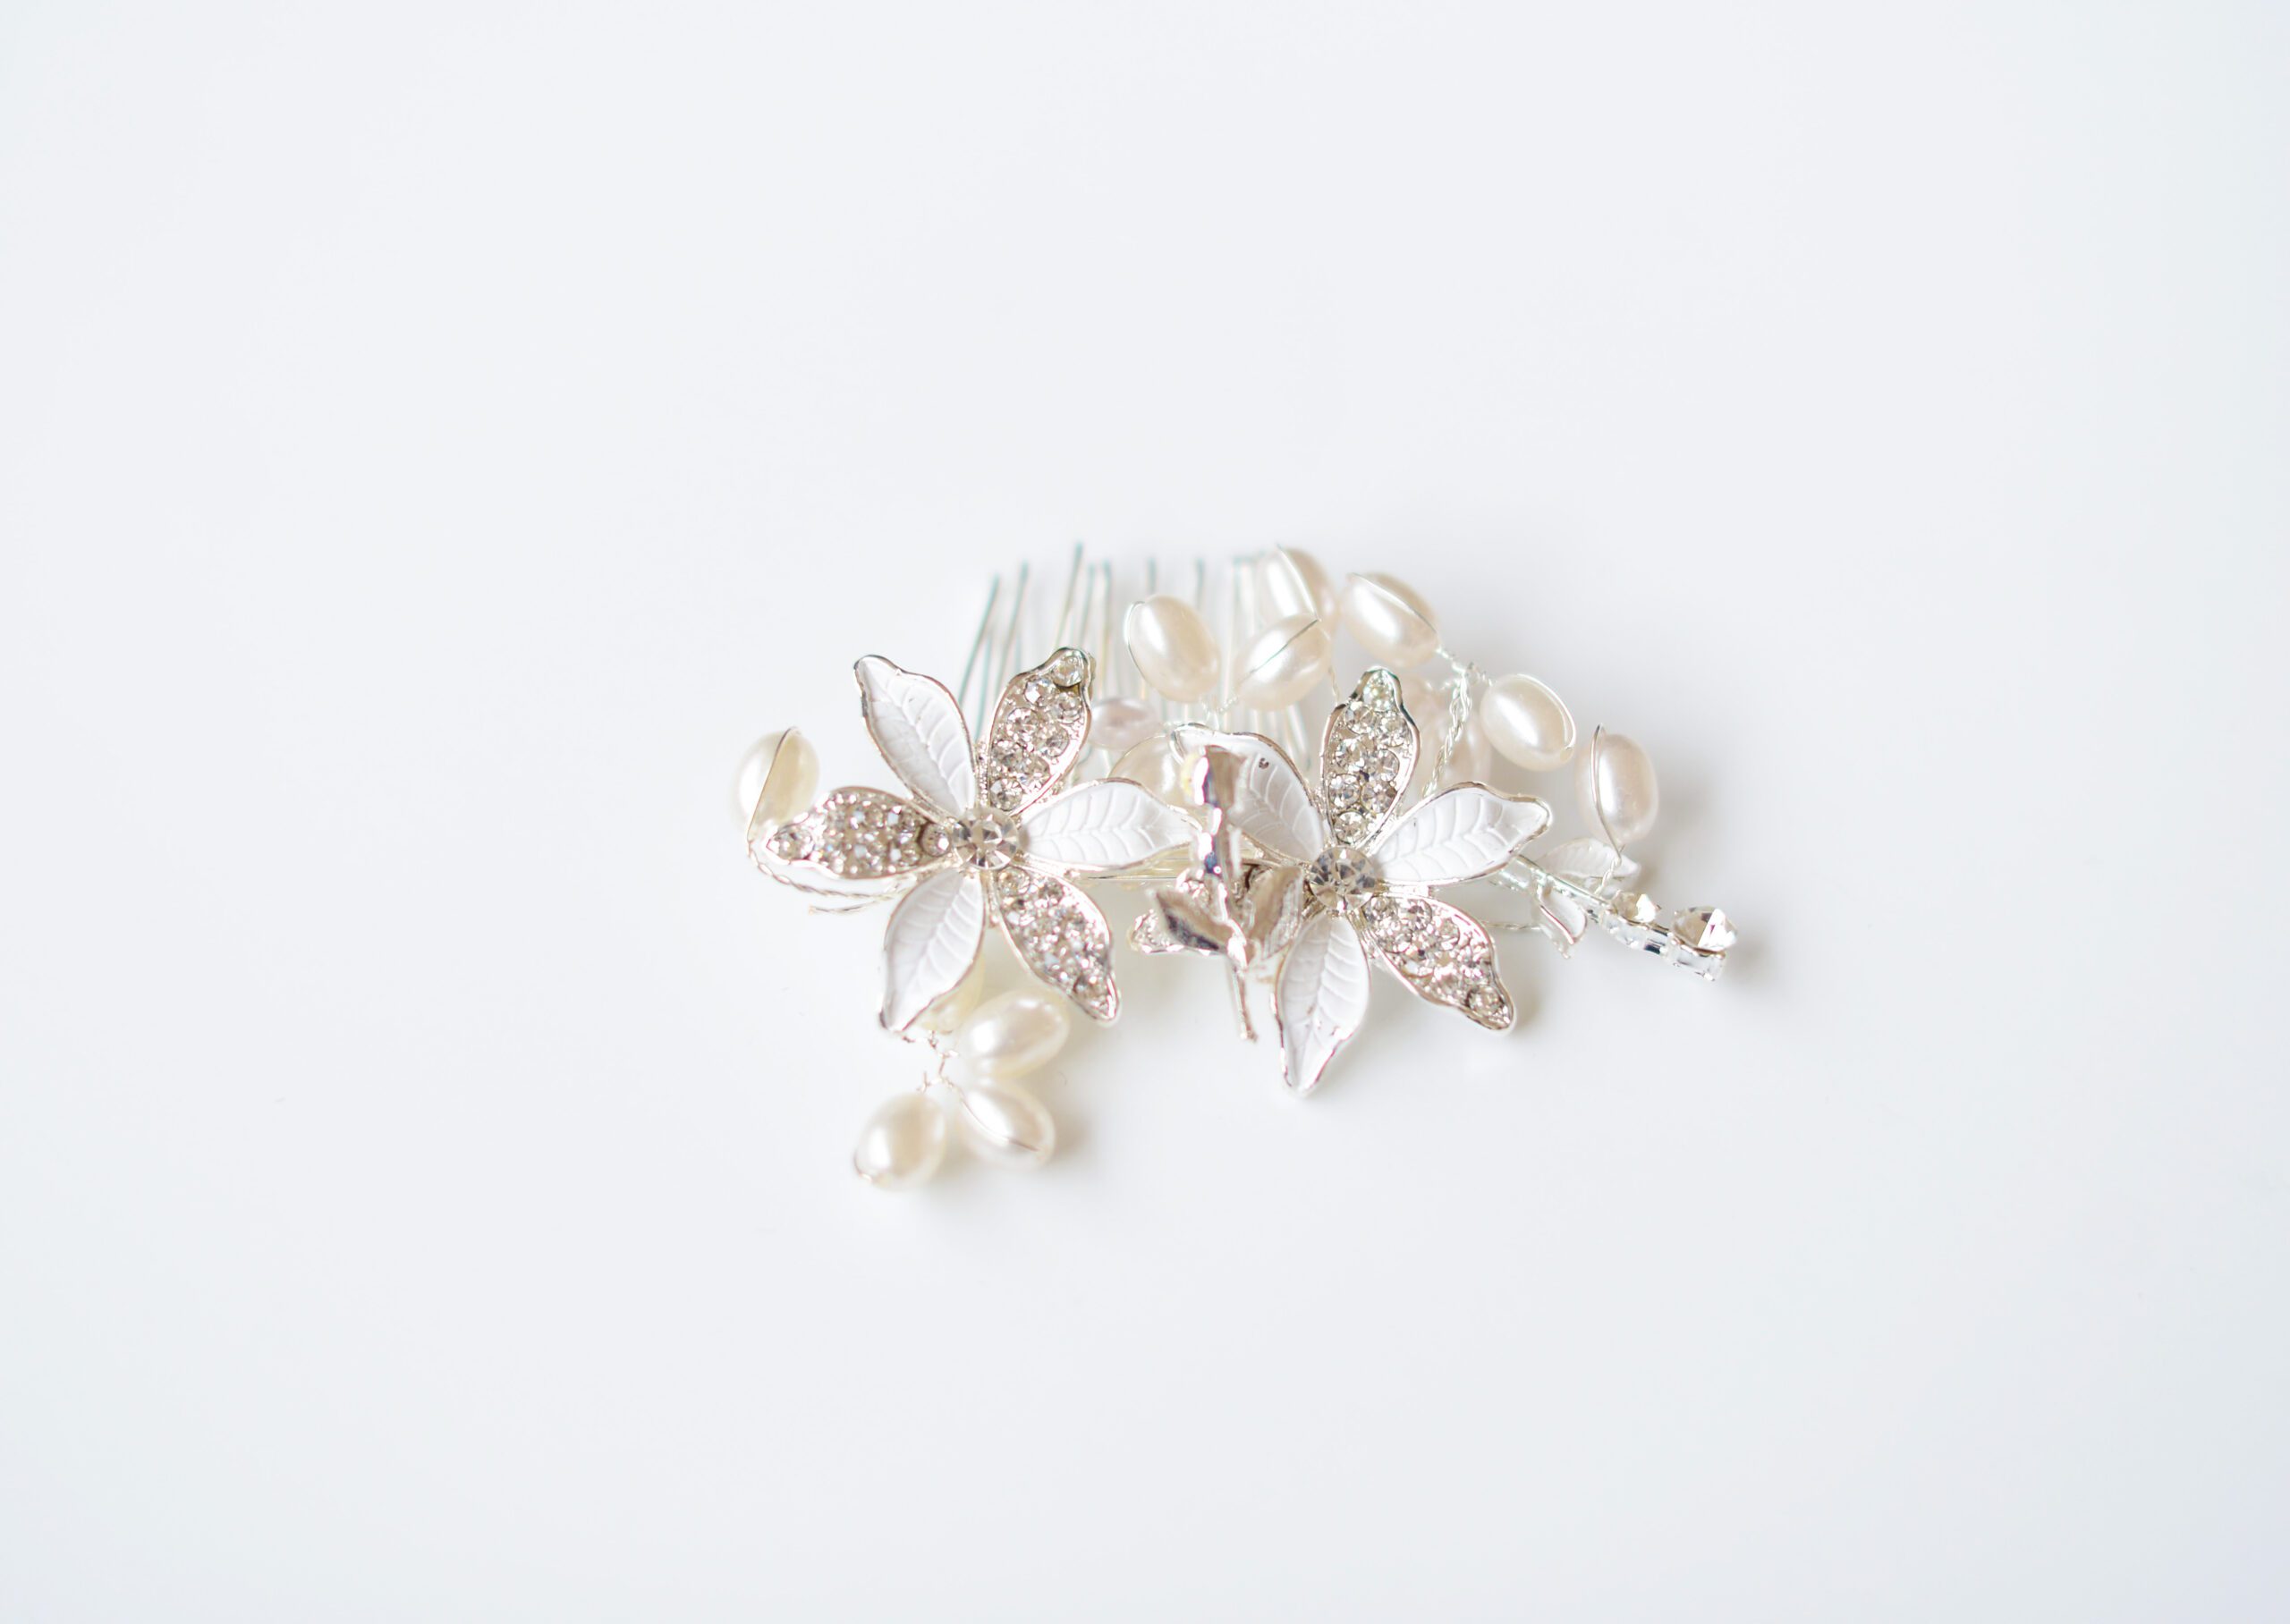 A photo of a silver bridal hair comb with delicate flowers